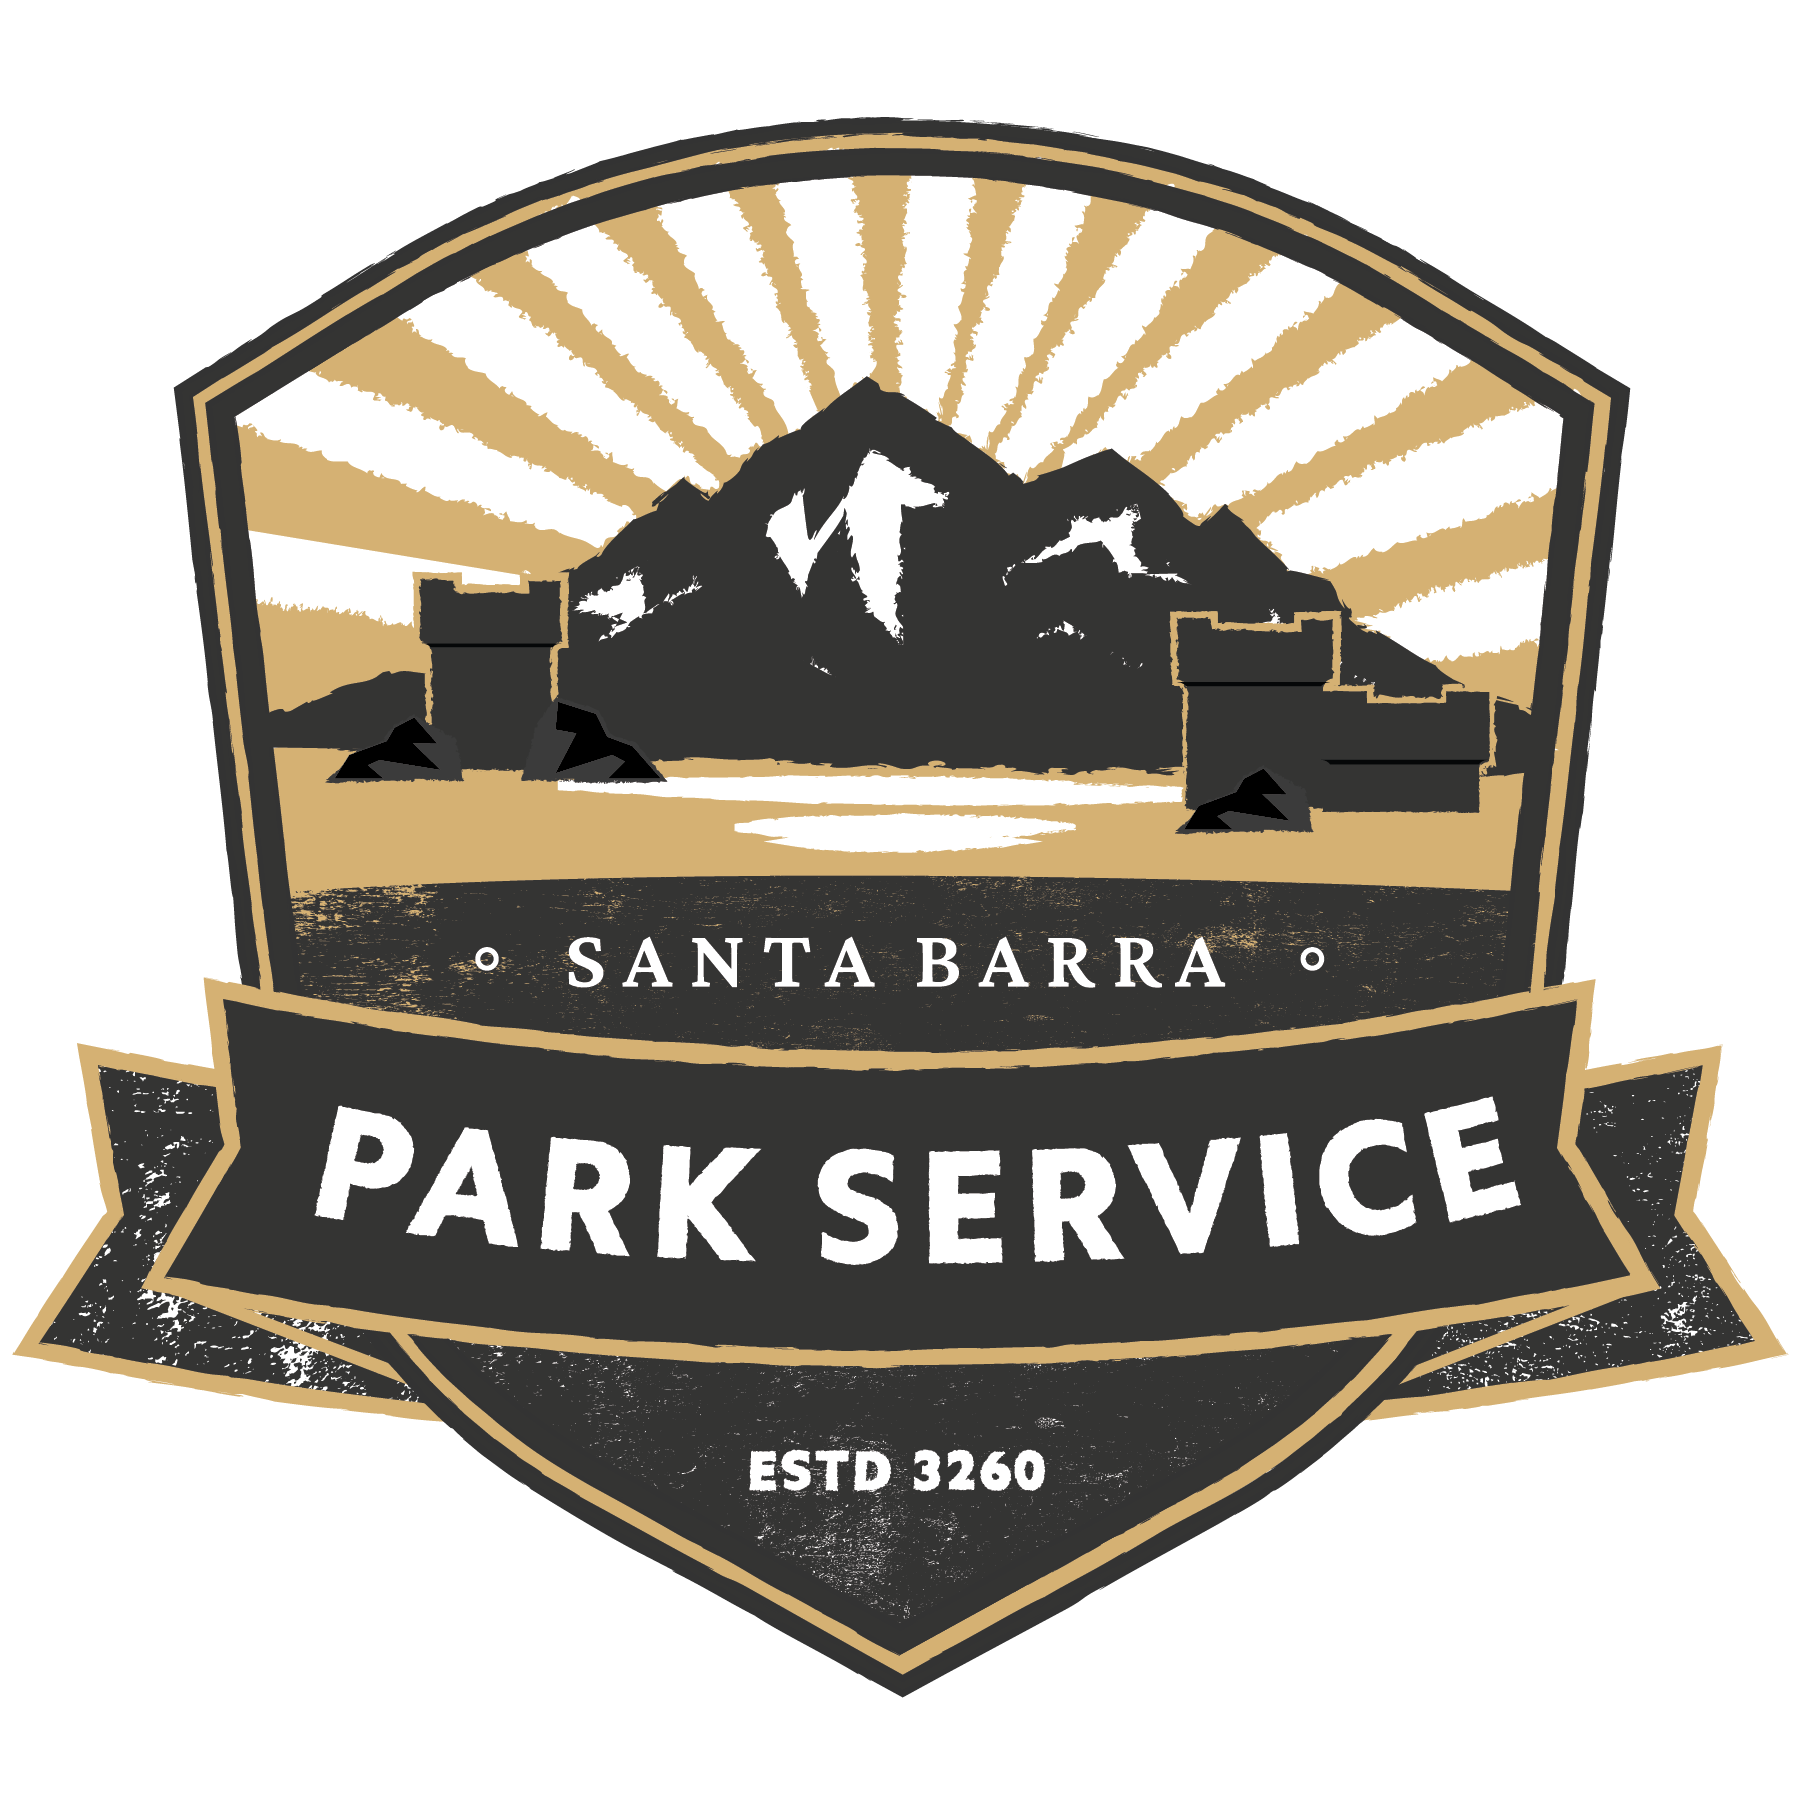 Welcome to the Santa Barra Park Service!